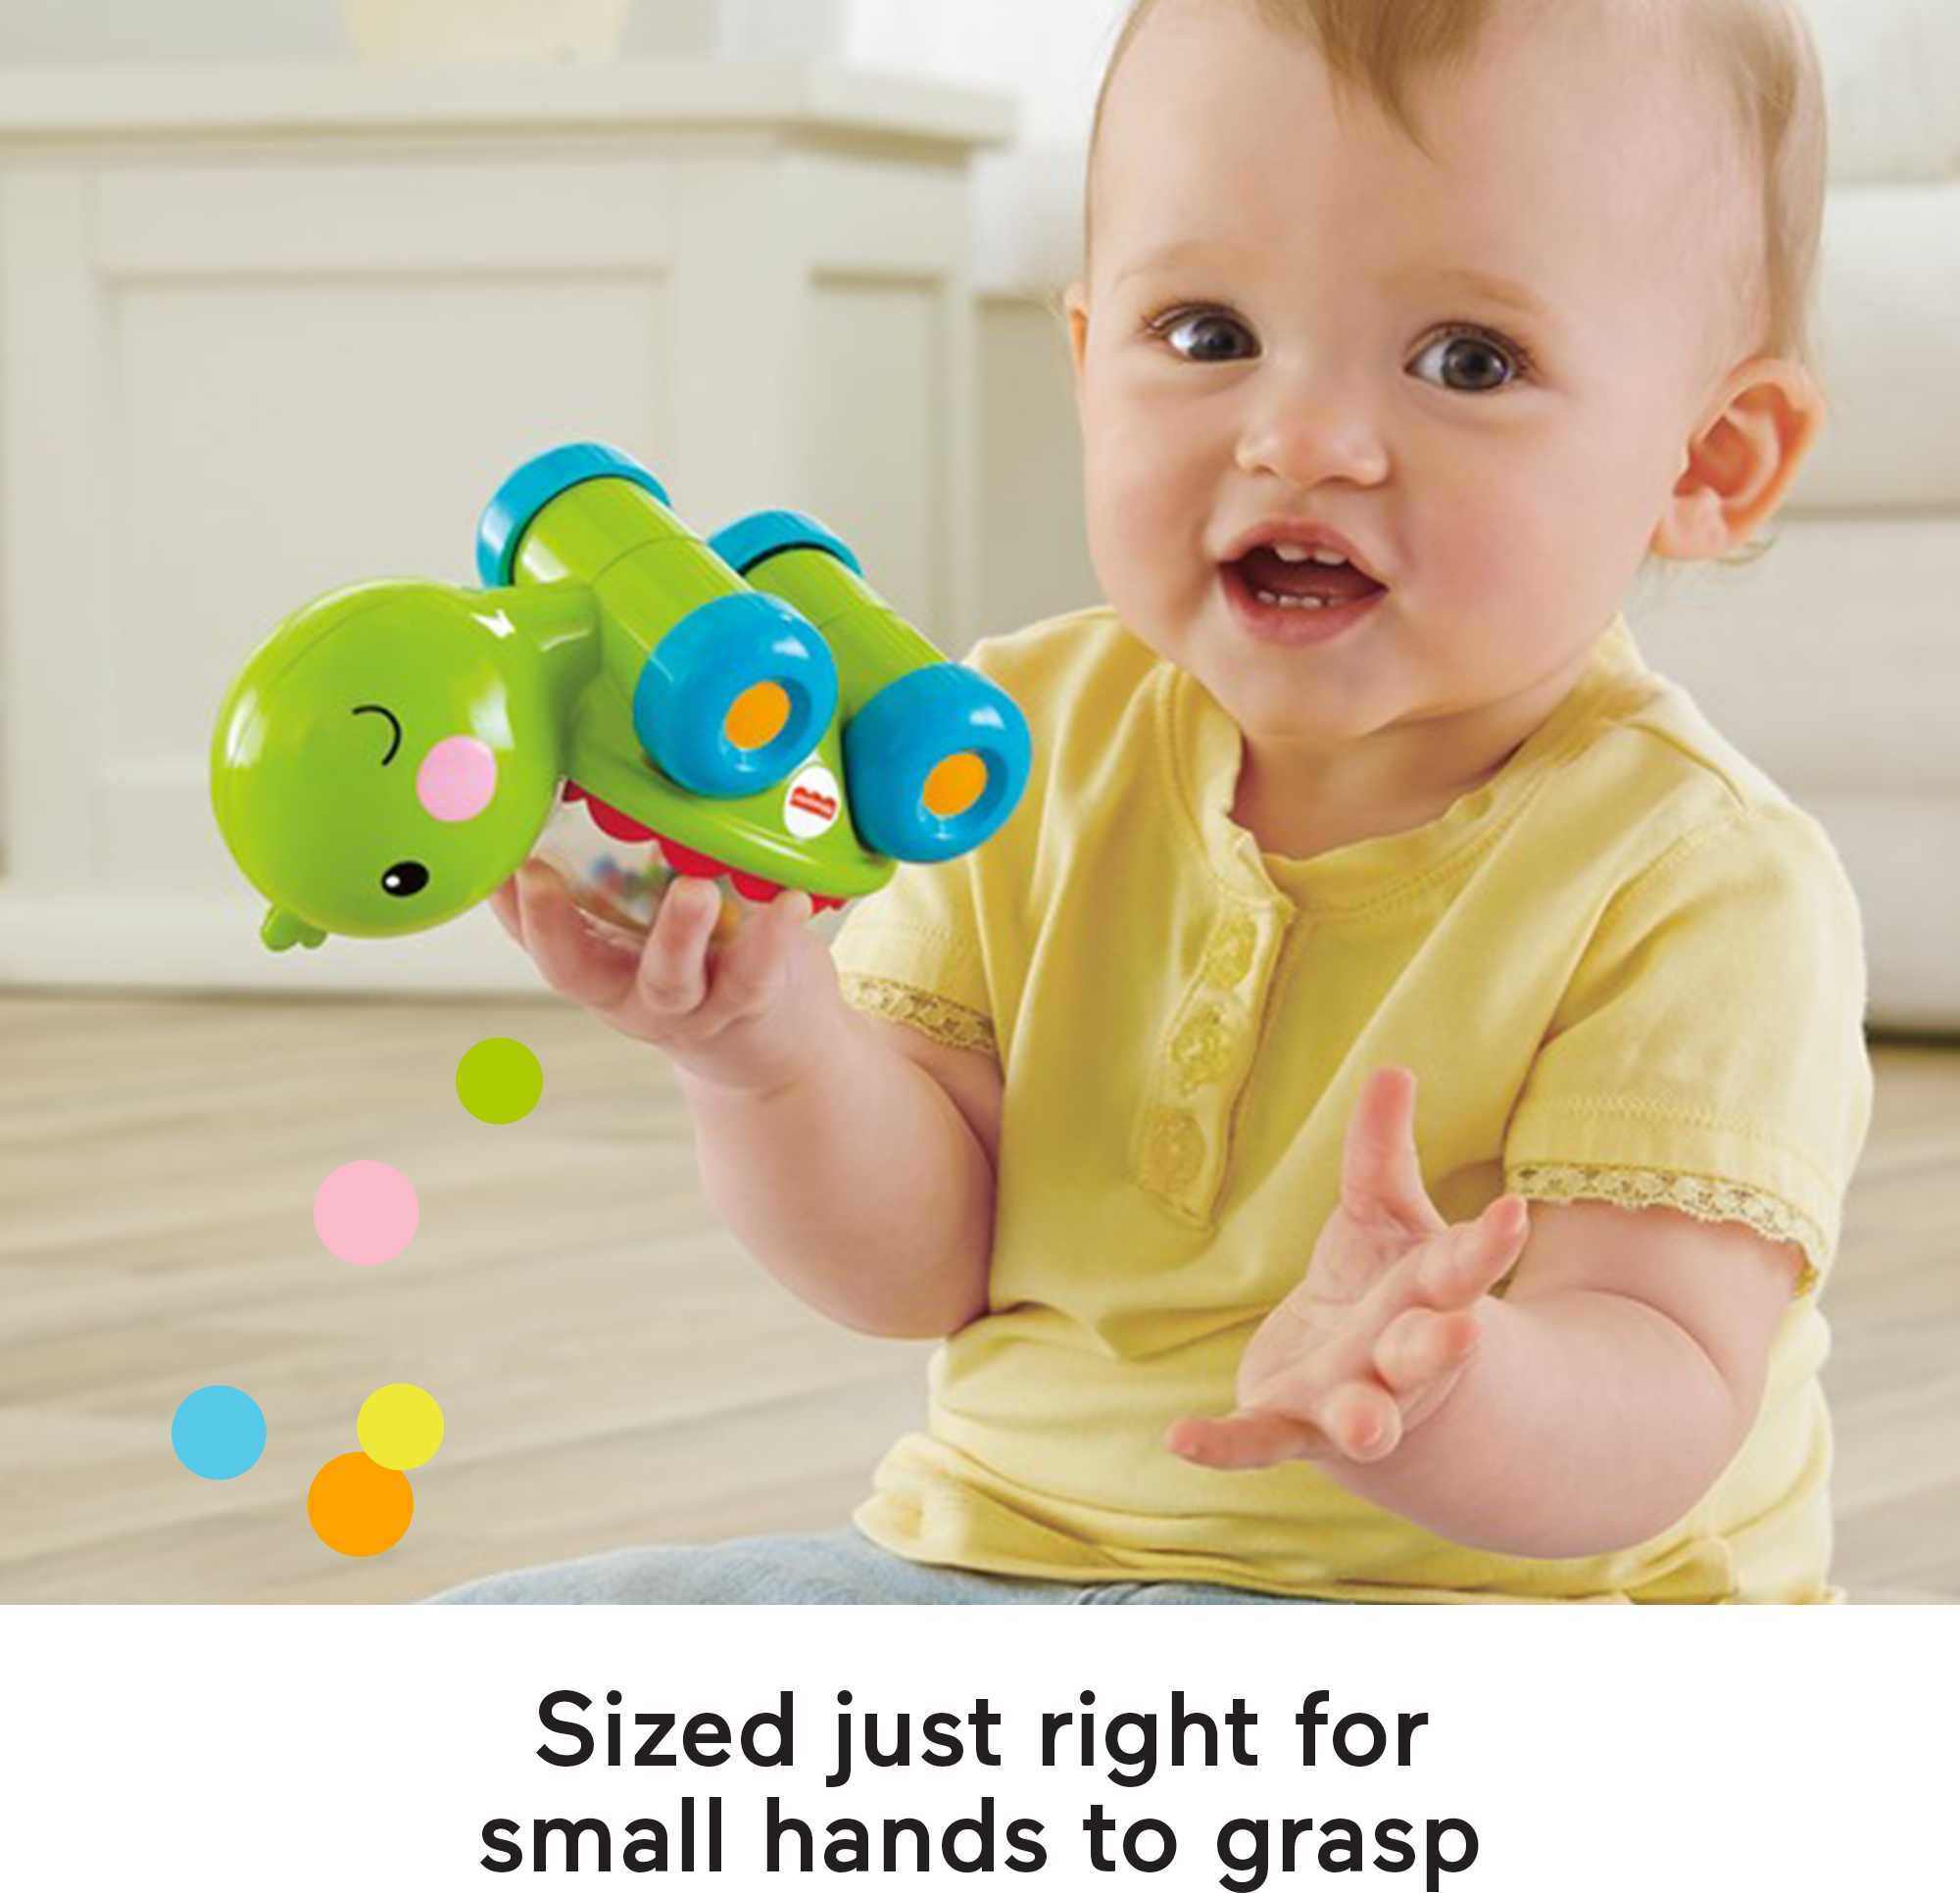 Fisher-Price Poppity Pop Turtle Push-Along Vehicle with Sounds for Infant Crawling Play - image 4 of 6